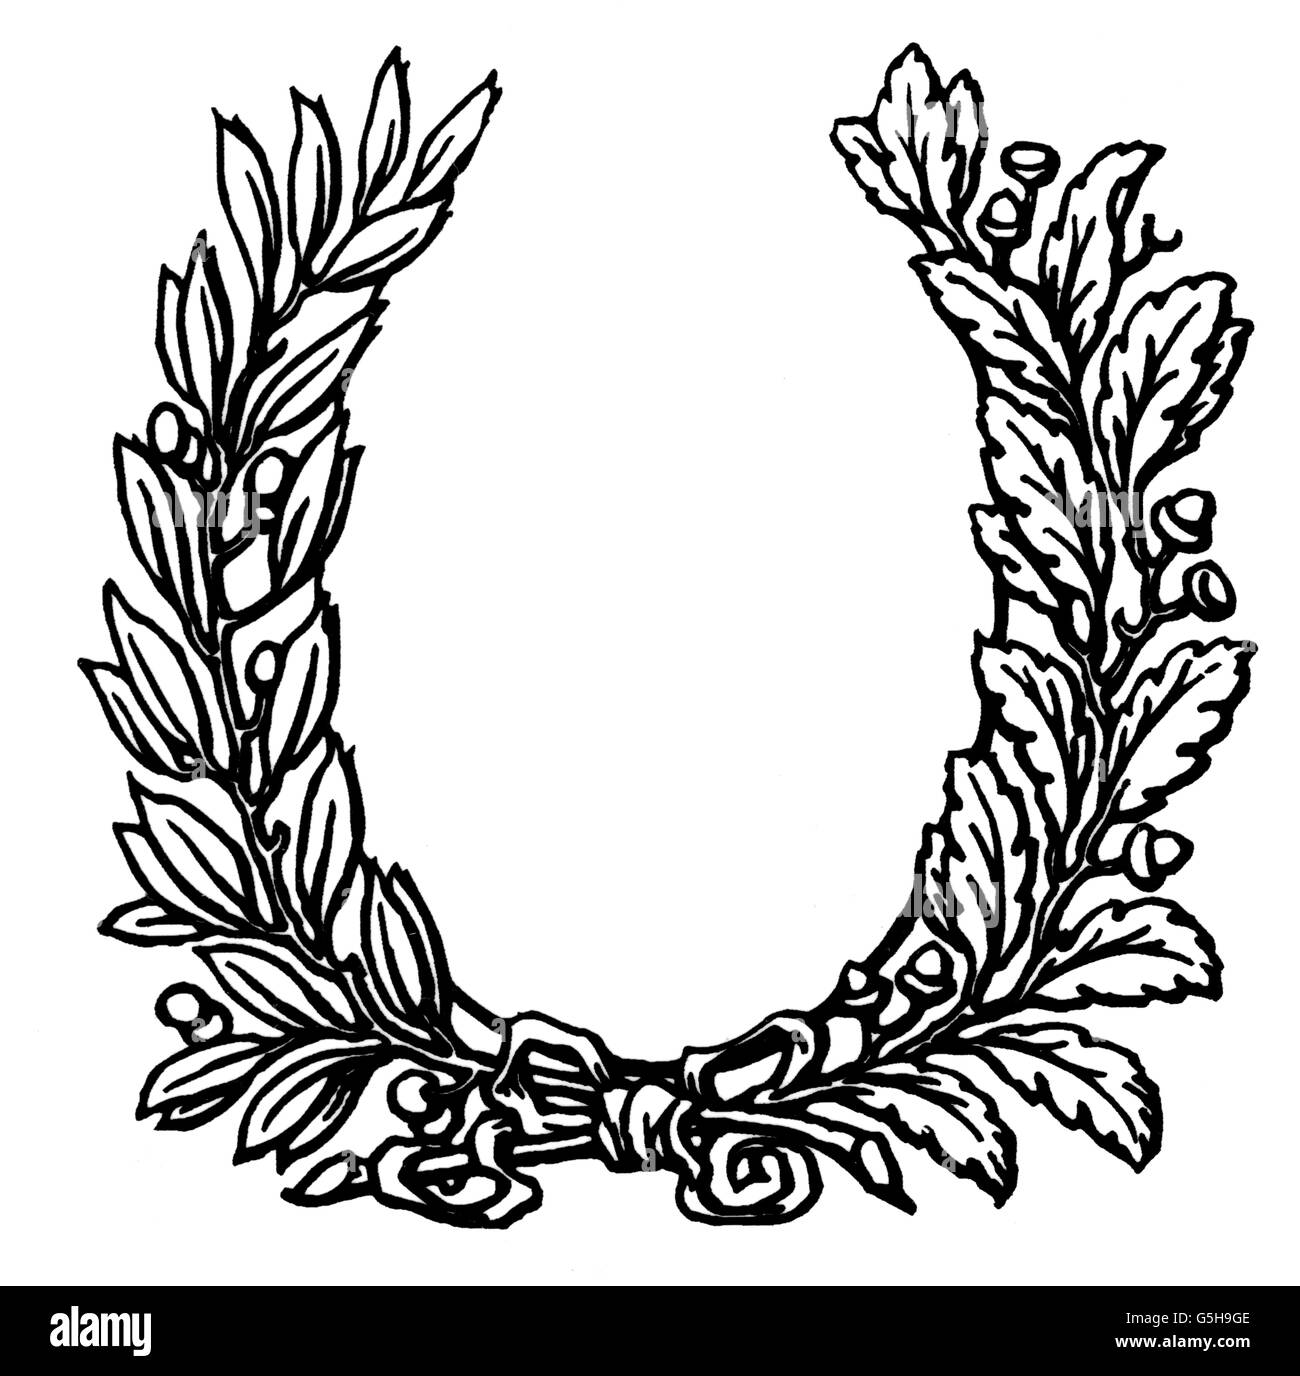 symbols, laurel wreath, computer graphics, 1990s, Additional-Rights-Clearences-Not Available Stock Photo